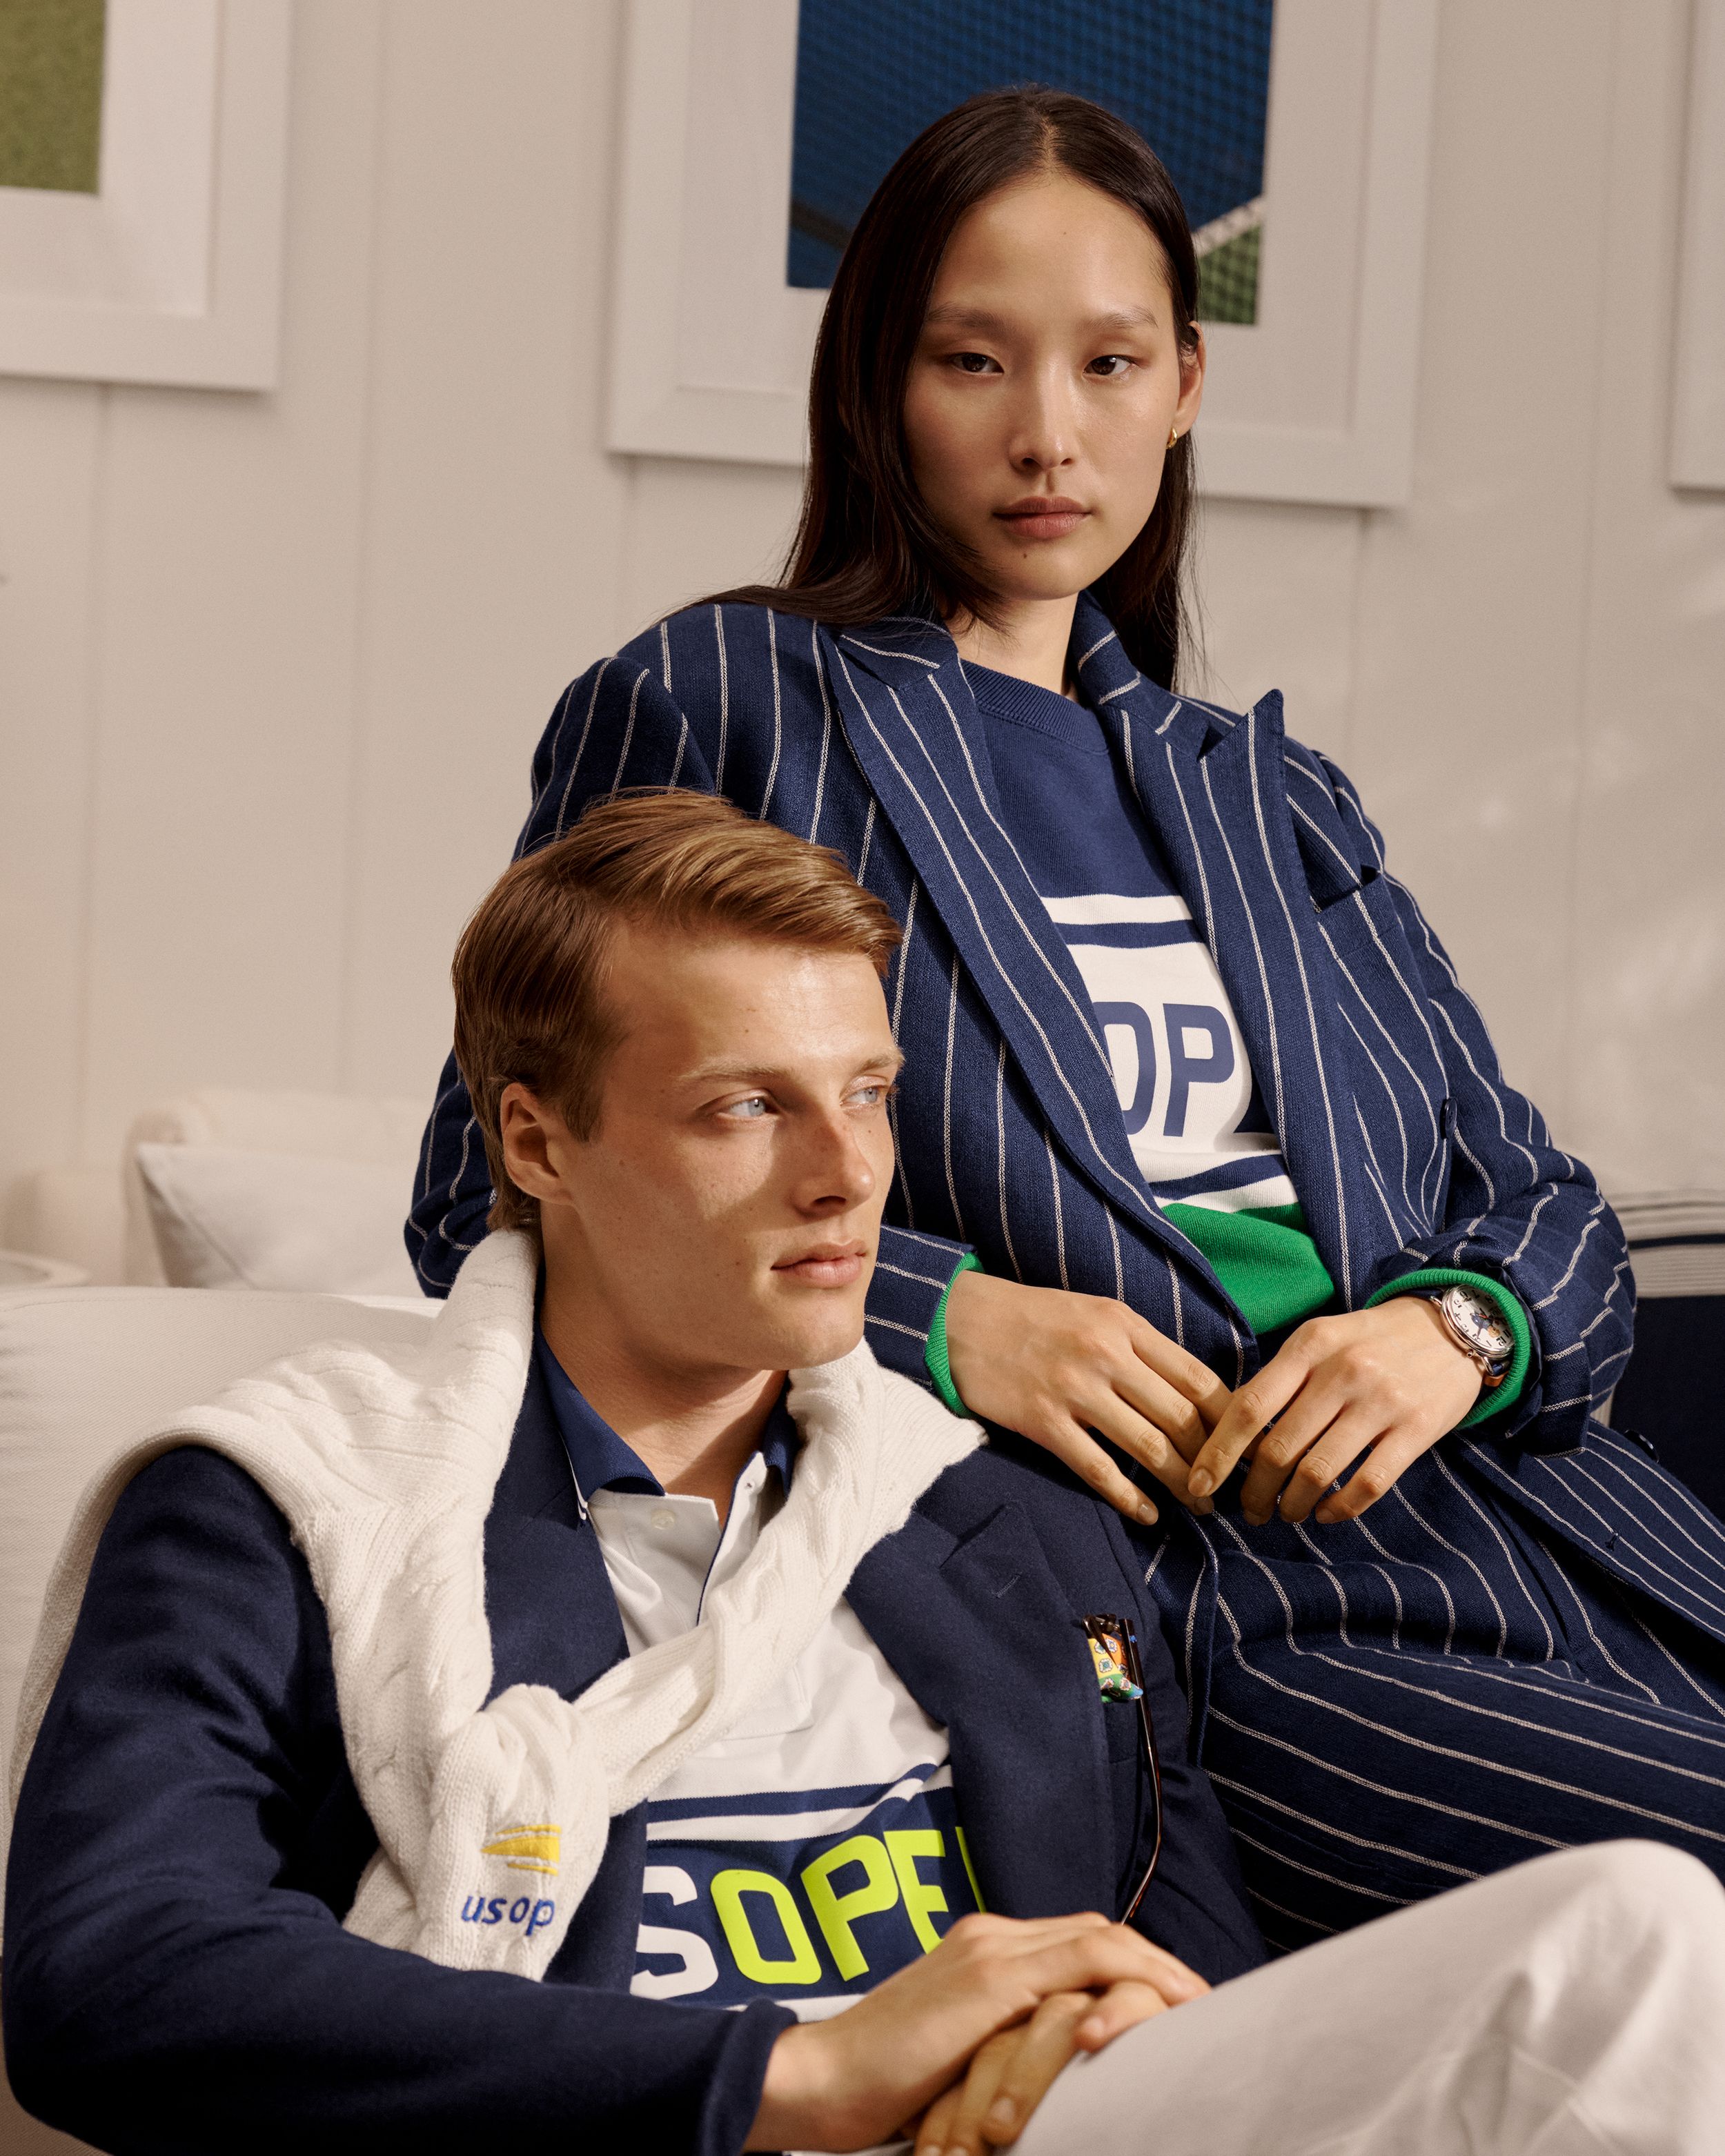 Ralph Lauren's 2022 U.S. Open Collection Is Here for All Your